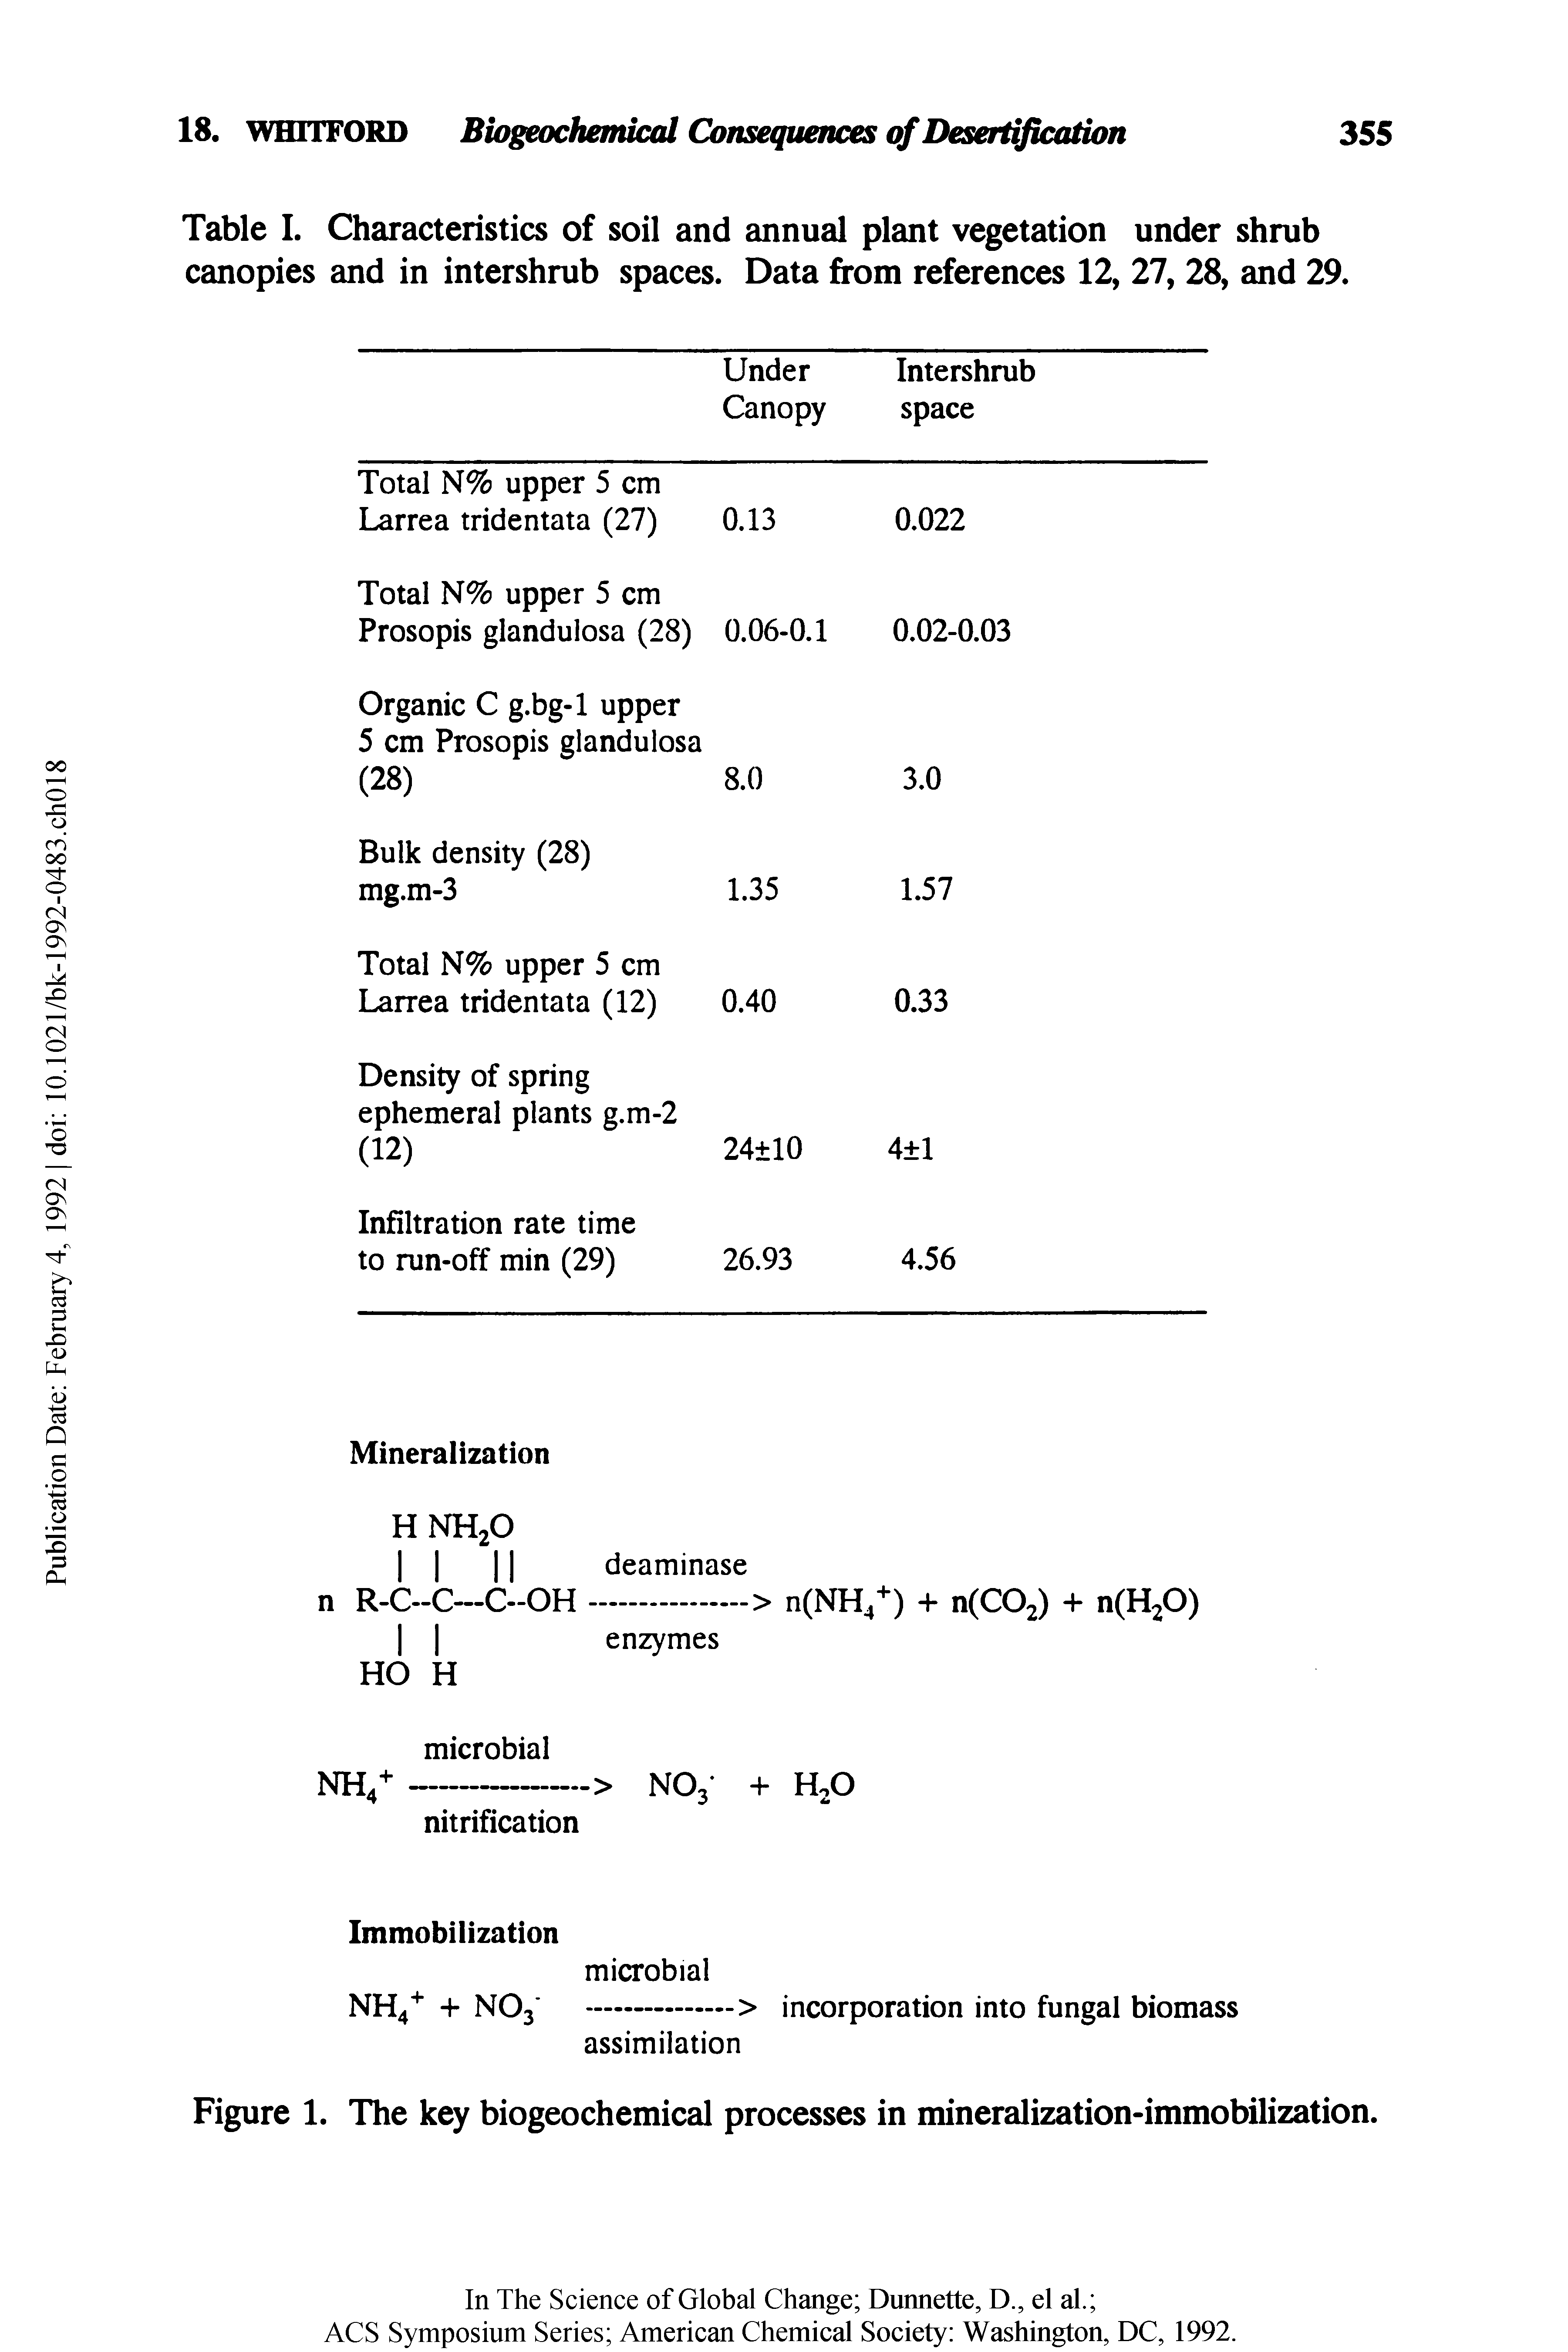 Table I. Characteristics of soil and annual plant vegetation under shrub canopies and in intershrub spaces. Data from references 12, 27, 28, and 29.